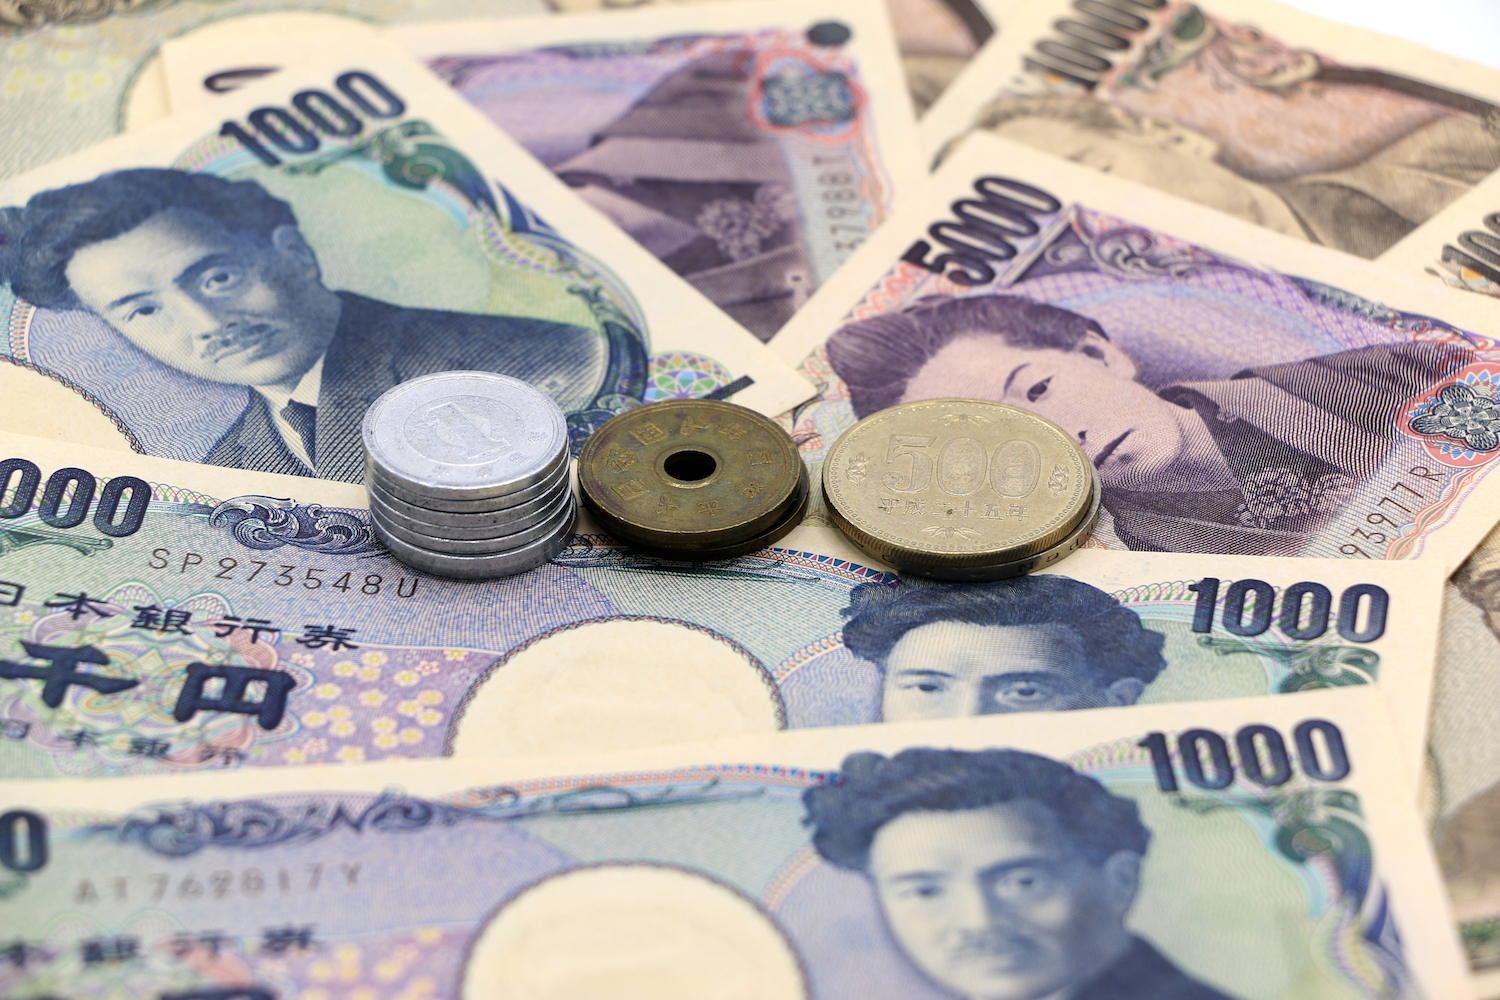 Japan’s Biggest Bank to Issue Yen-Pegged Stablecoin for Settlement: Report